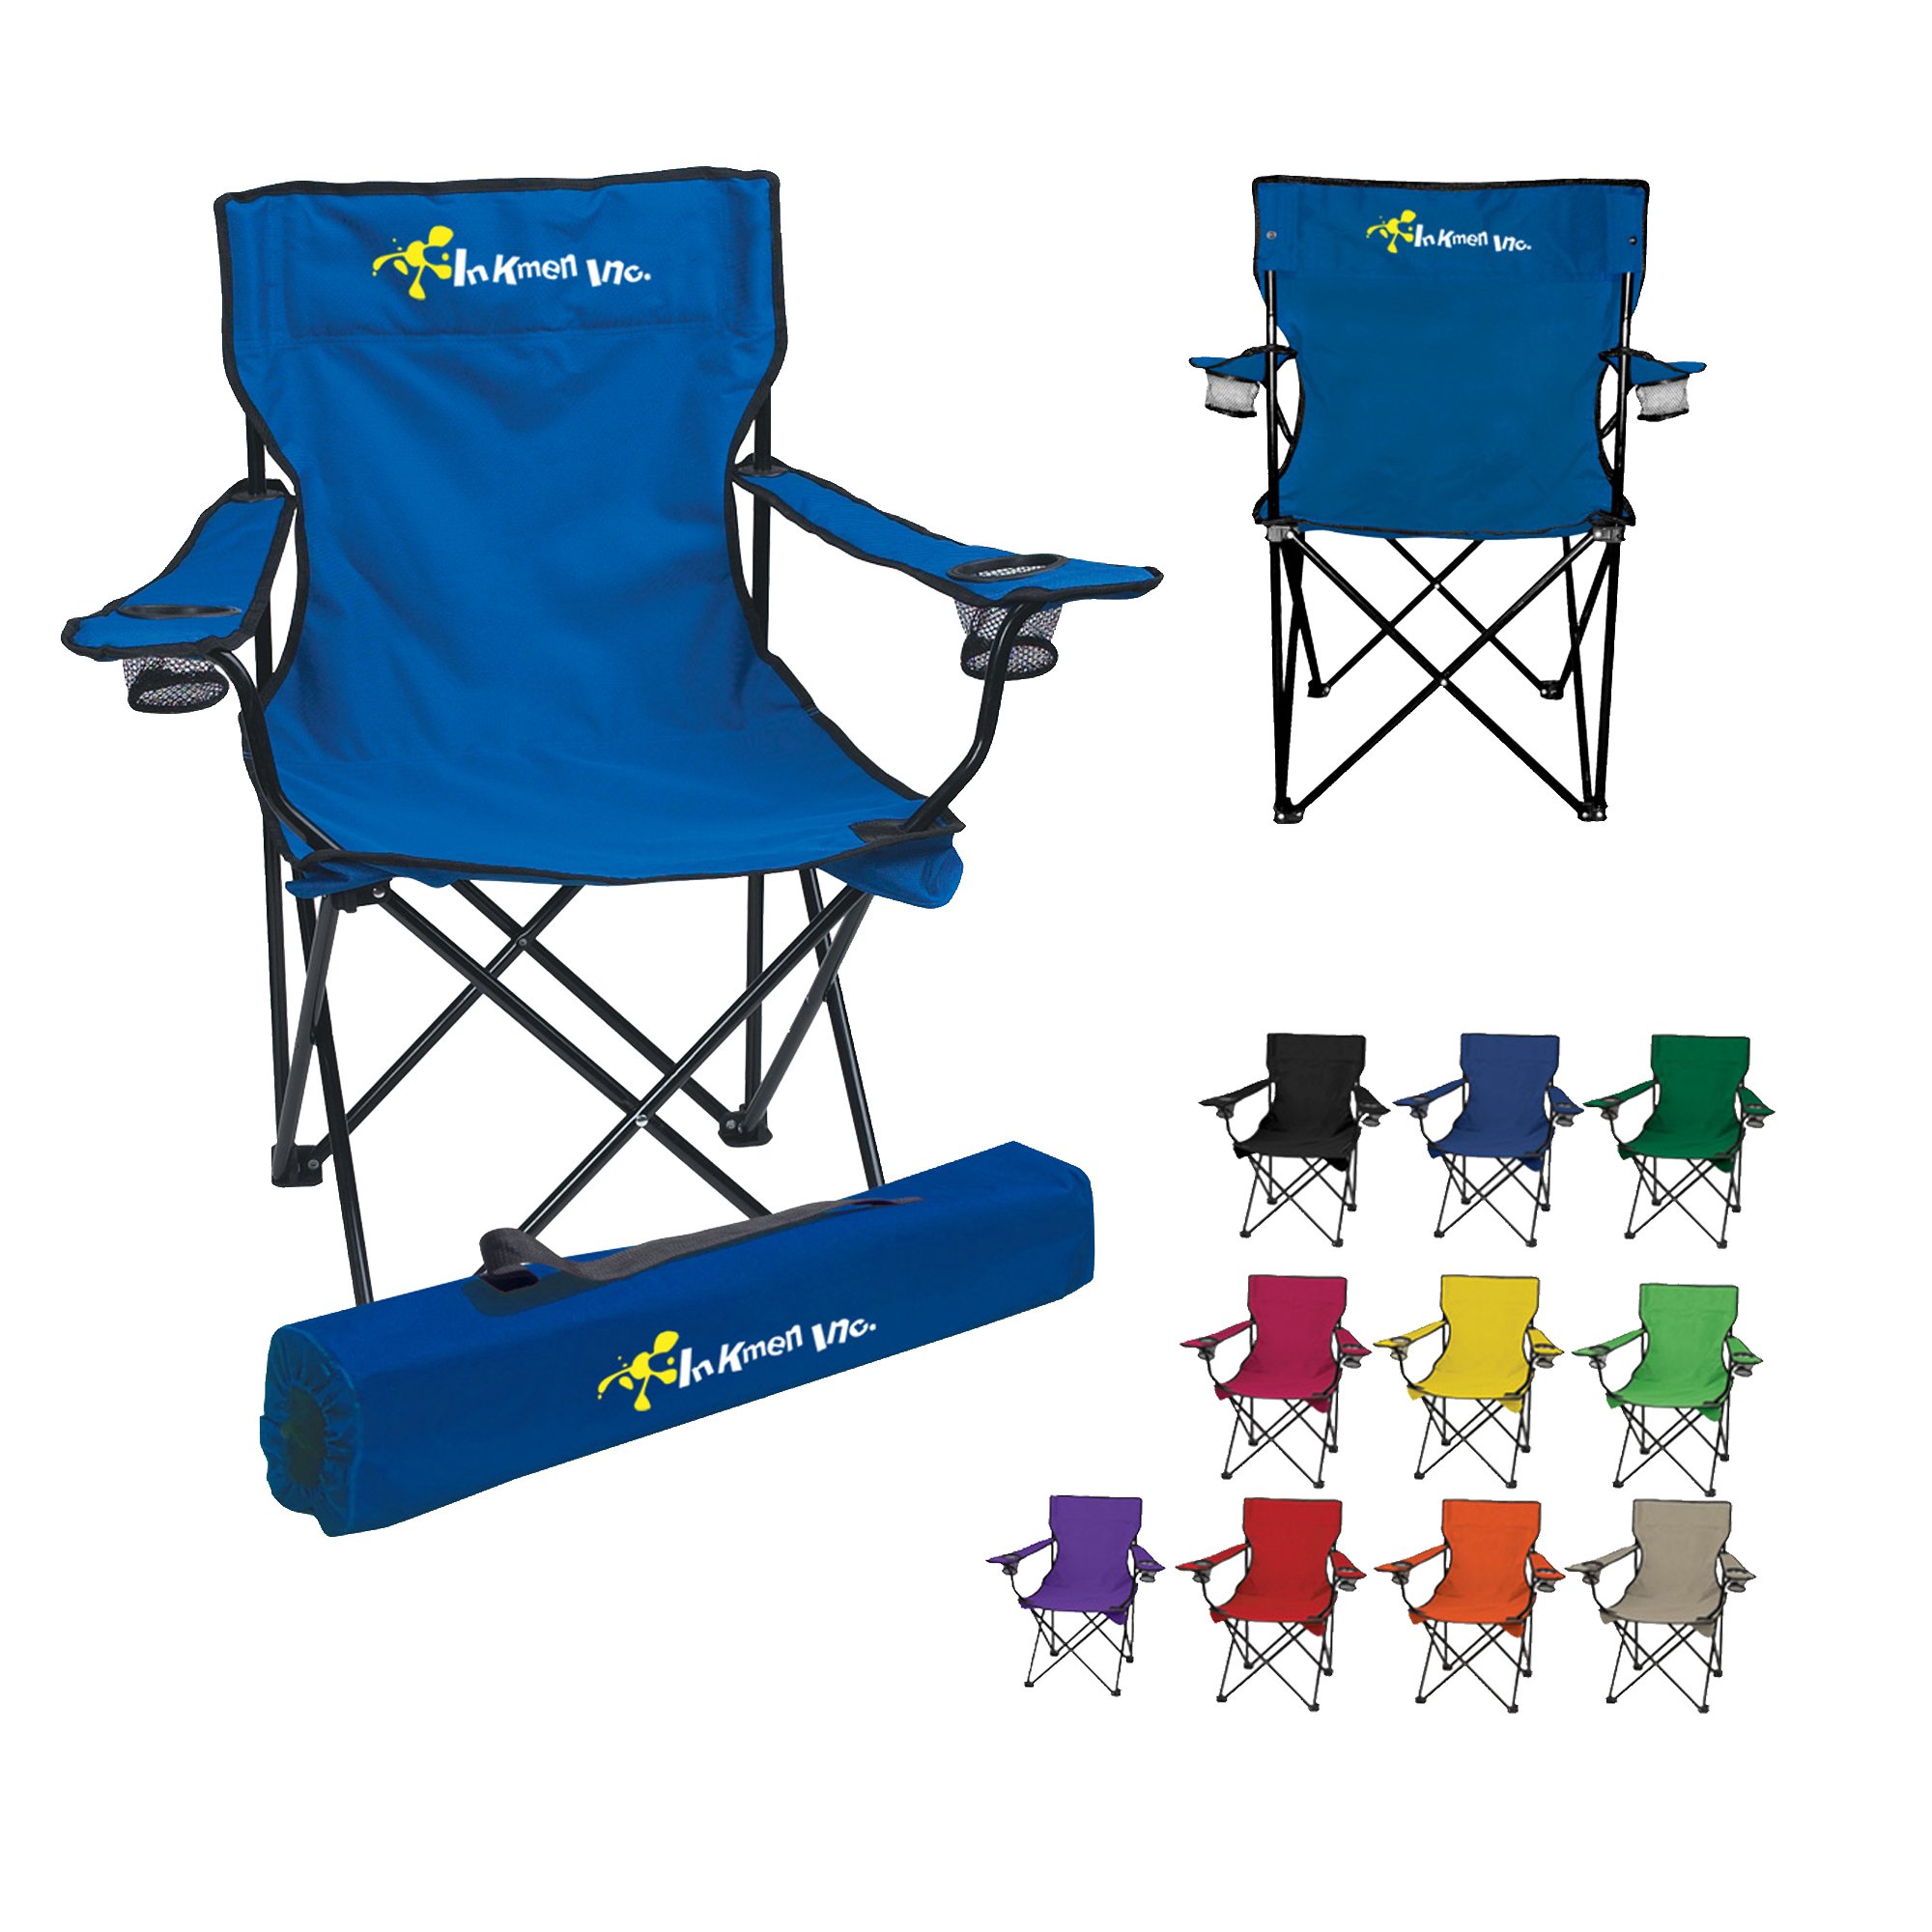 Promotional Folding Chairs With Logo Personalized Lawn Chairs